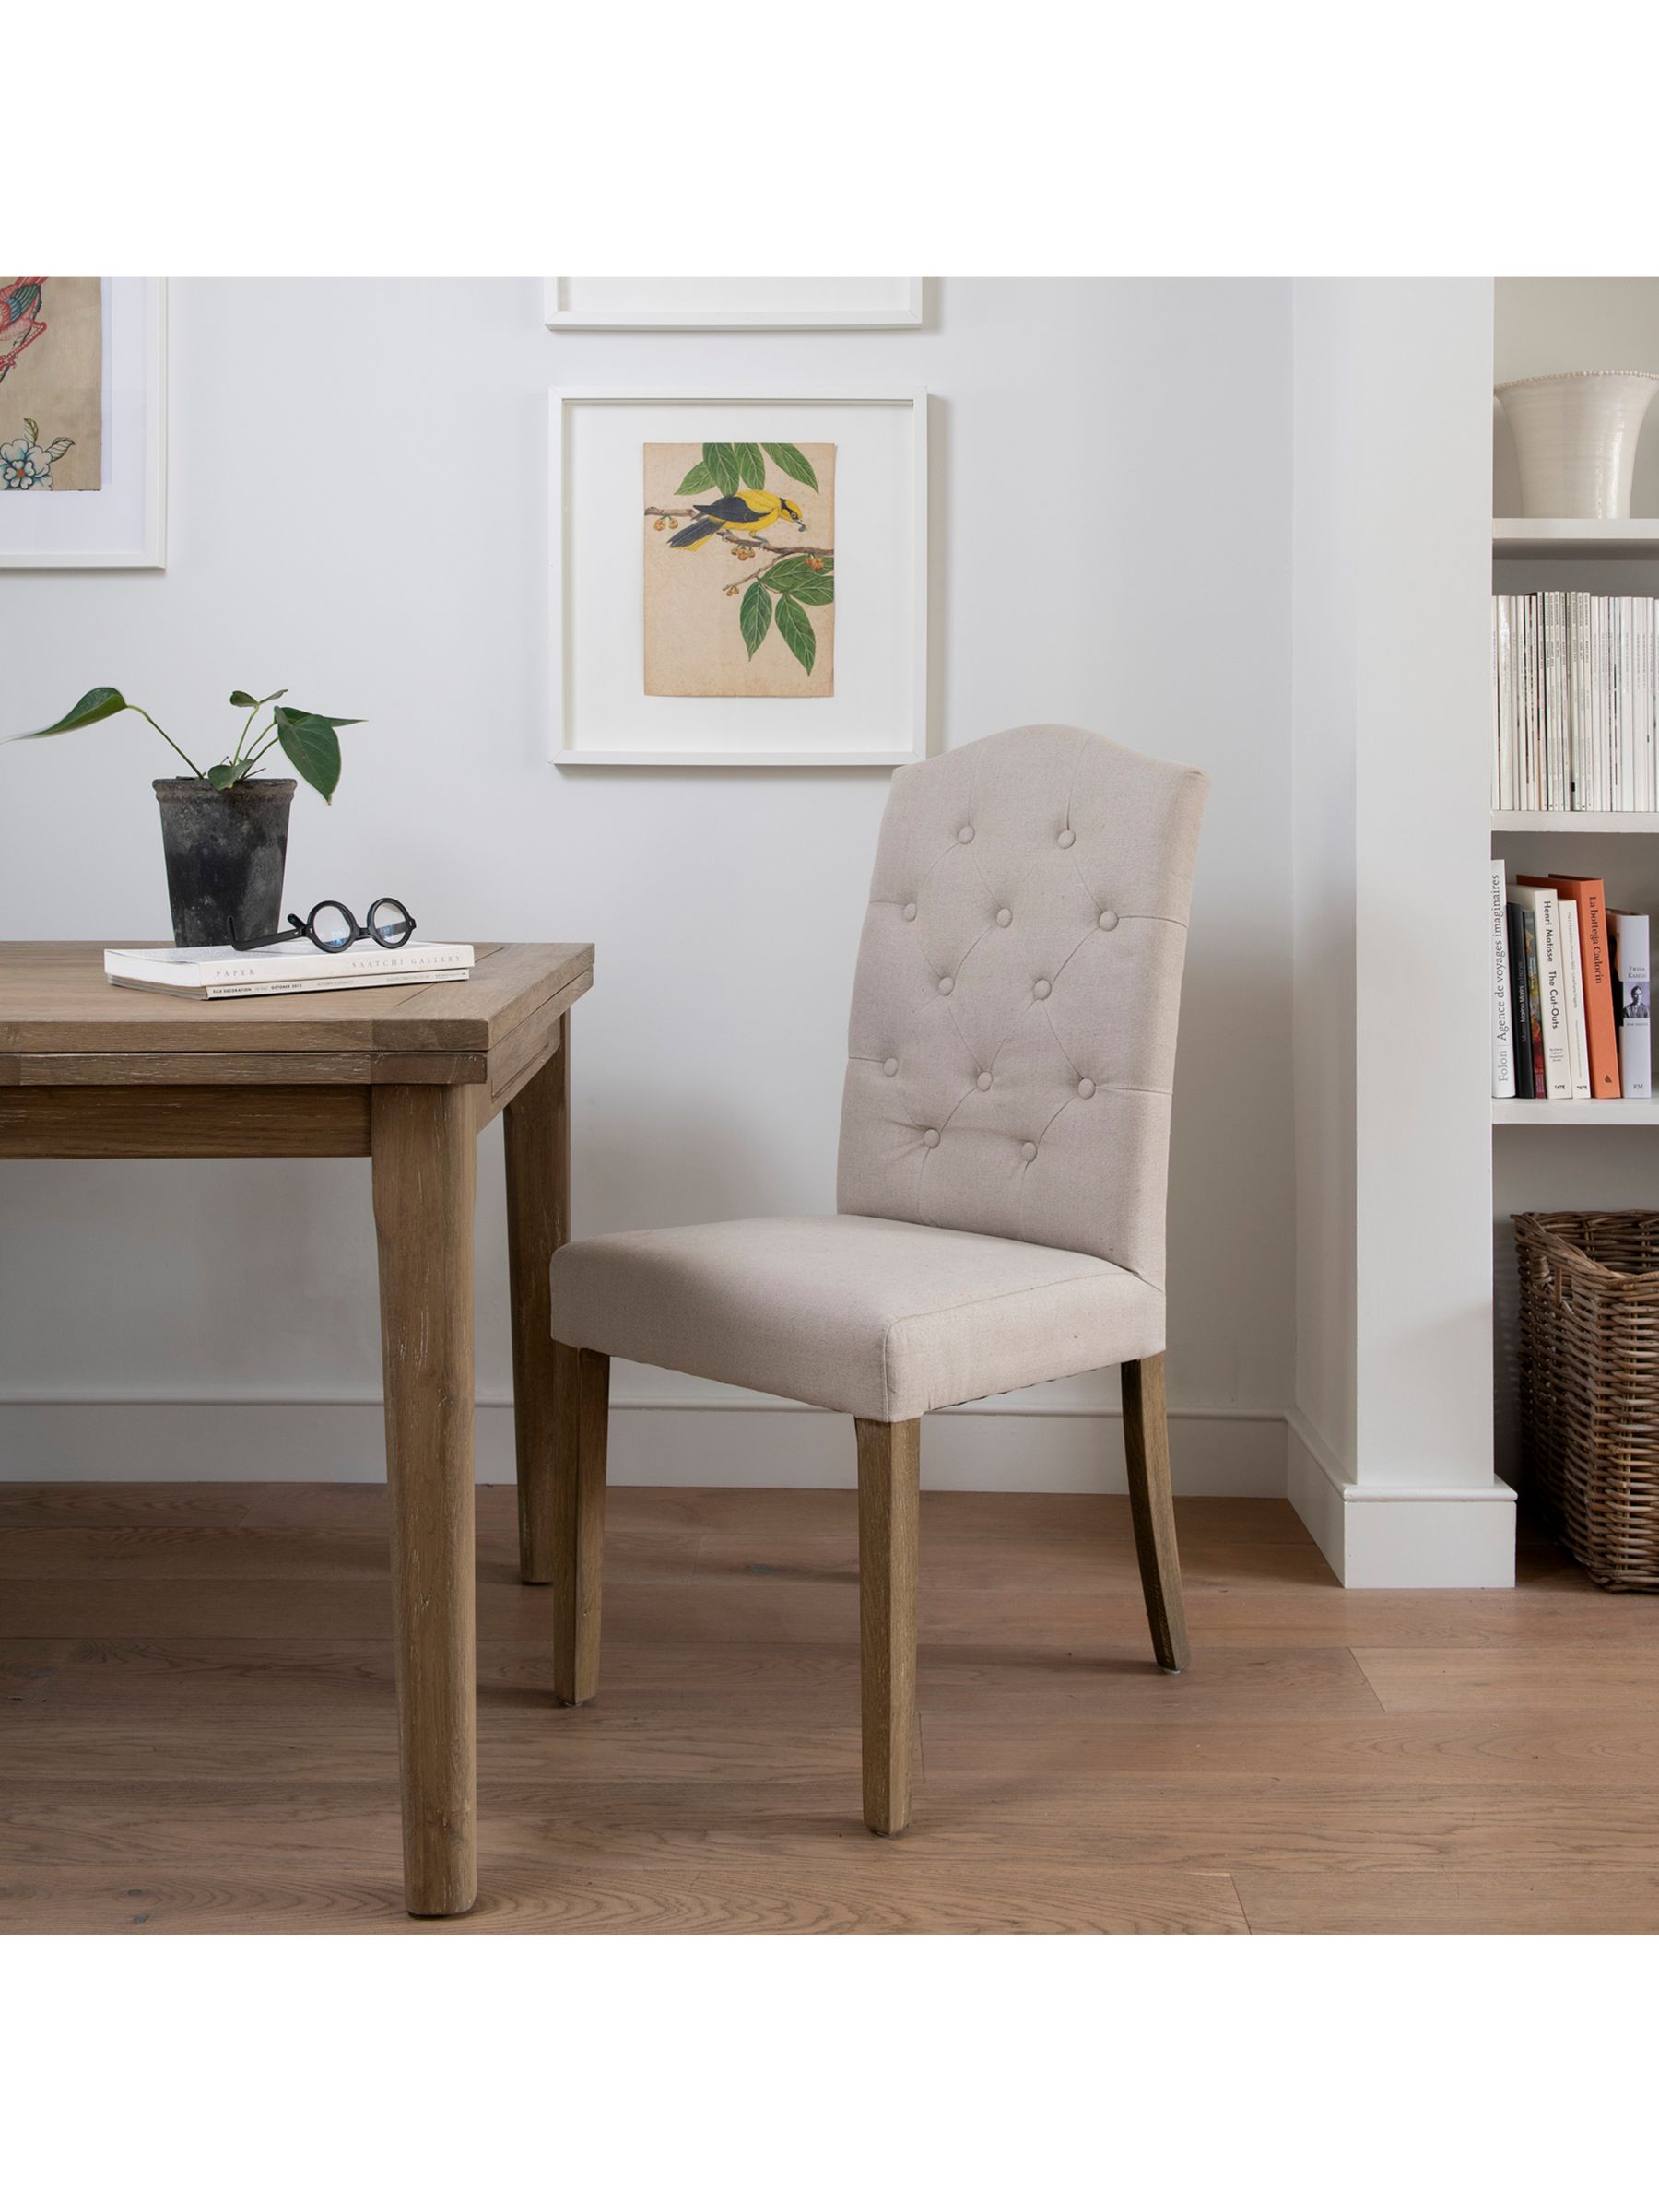 Photo of One.world st james linen & oak wood dining chair